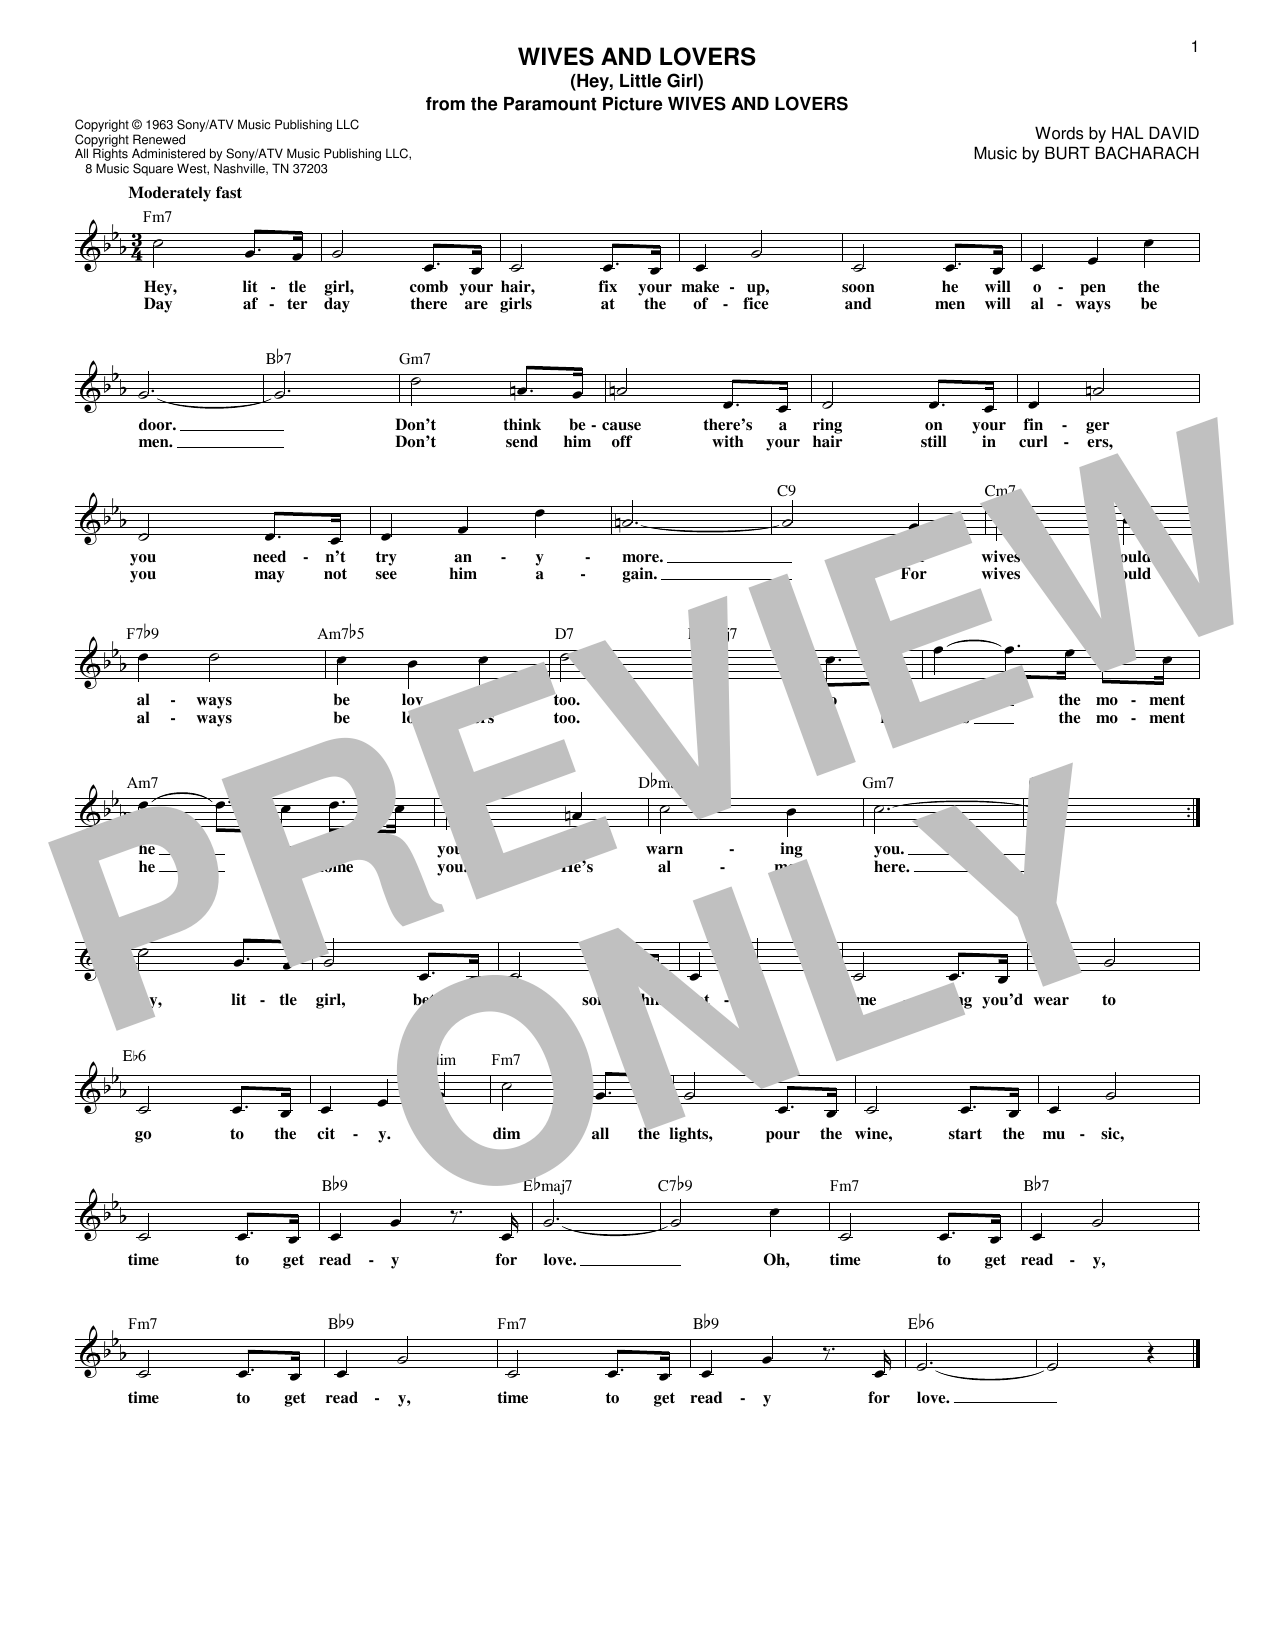 Burt Bacharach Wives And Lovers (Hey, Little Girl) sheet music notes and chords. Download Printable PDF.